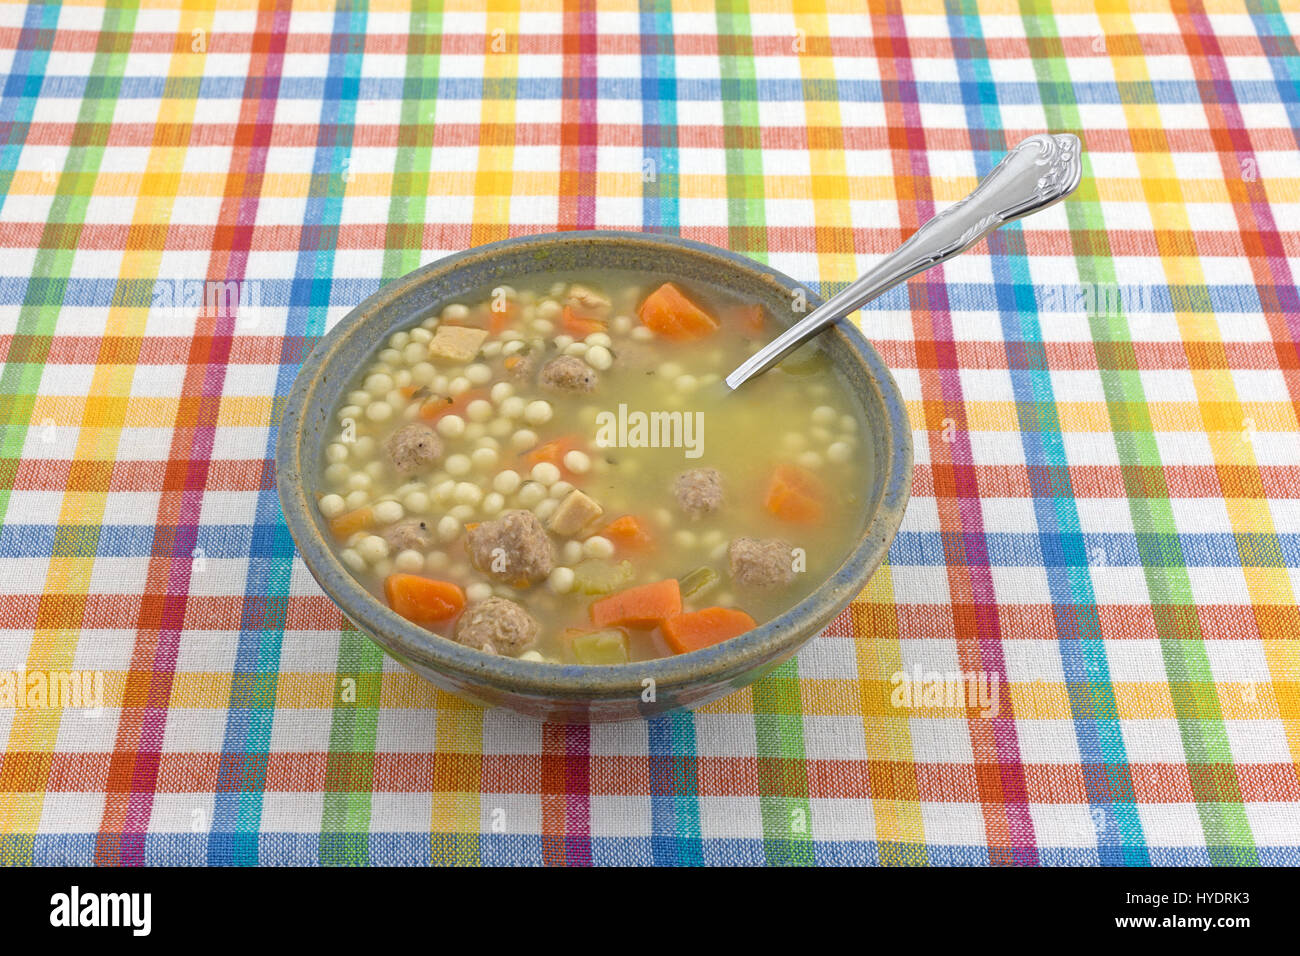 Bowl of Italian style wedding soup with a spoon in the food atop a colorful cloth place mat. Stock Photo